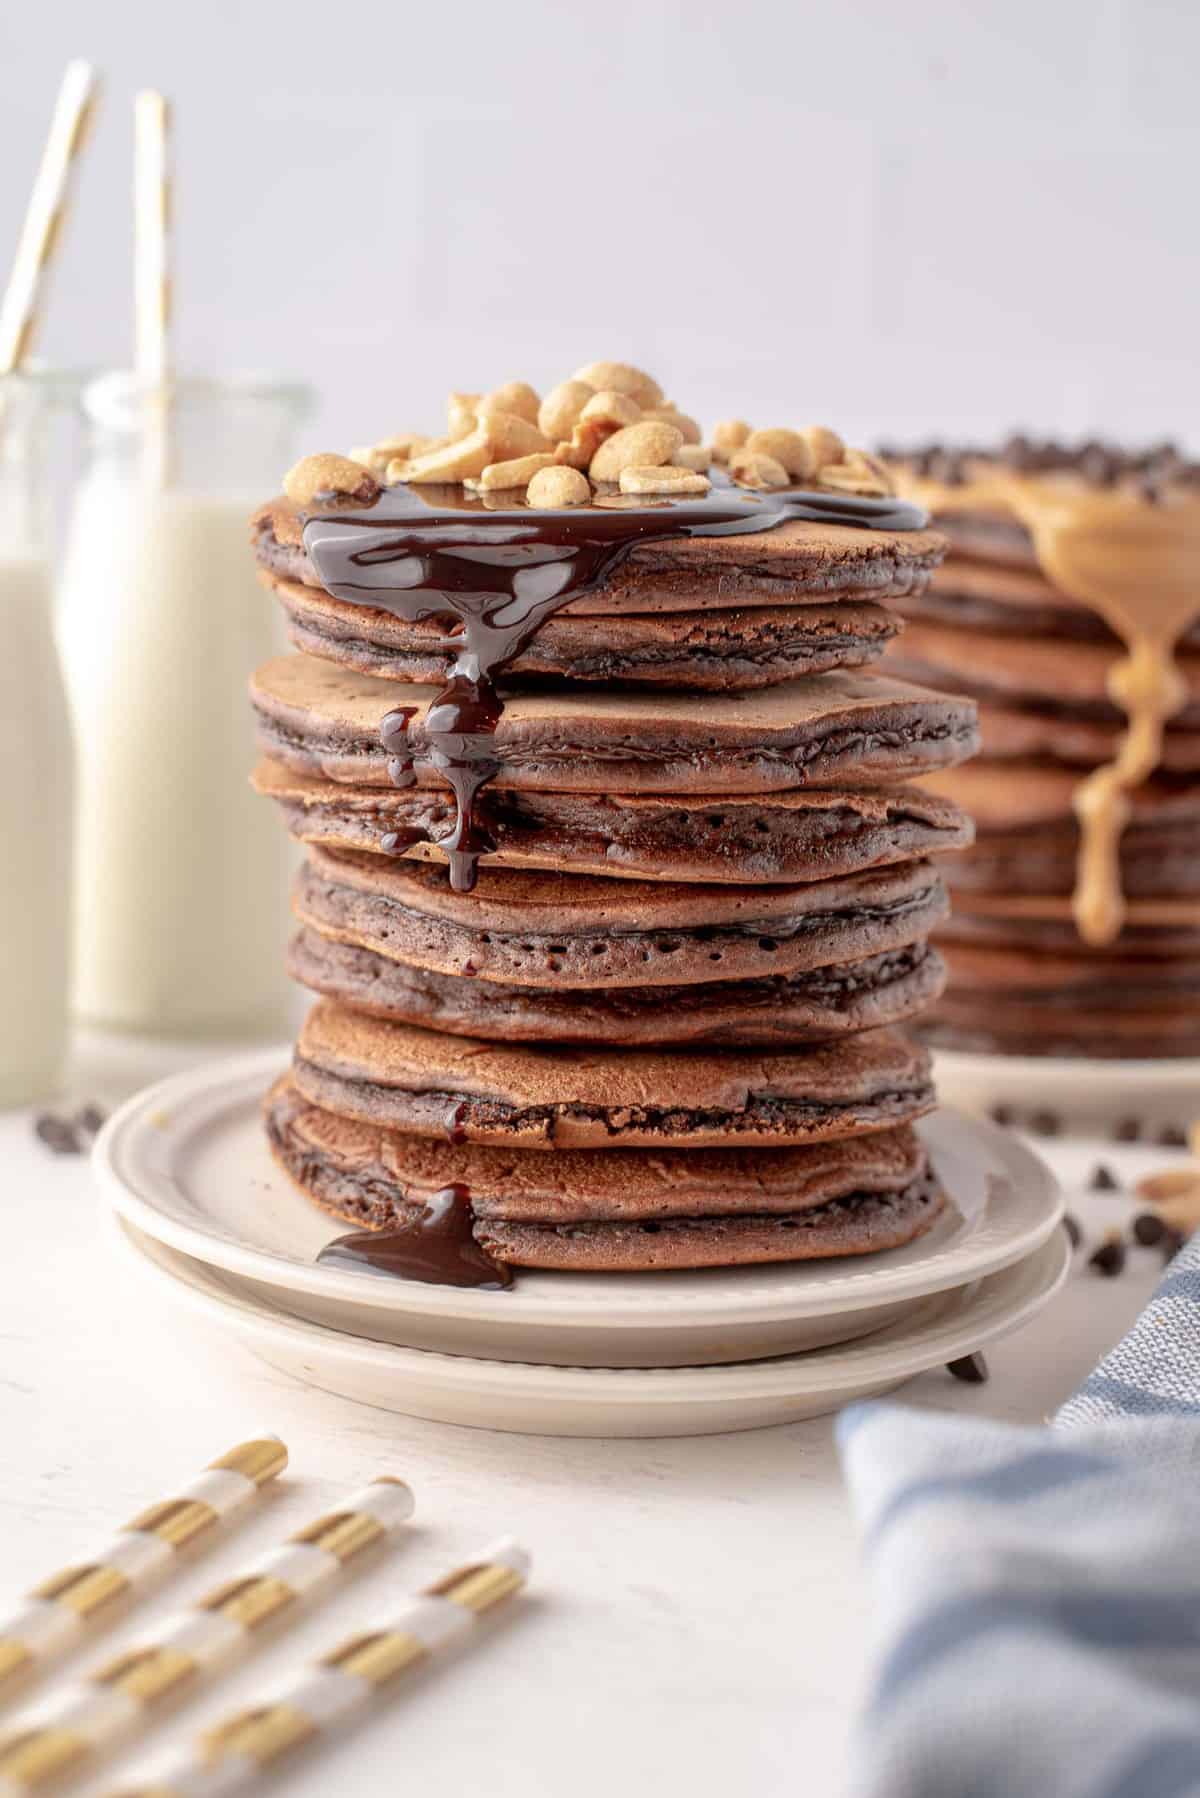 Very tall stack of chocolate pancakes with peanut butter.